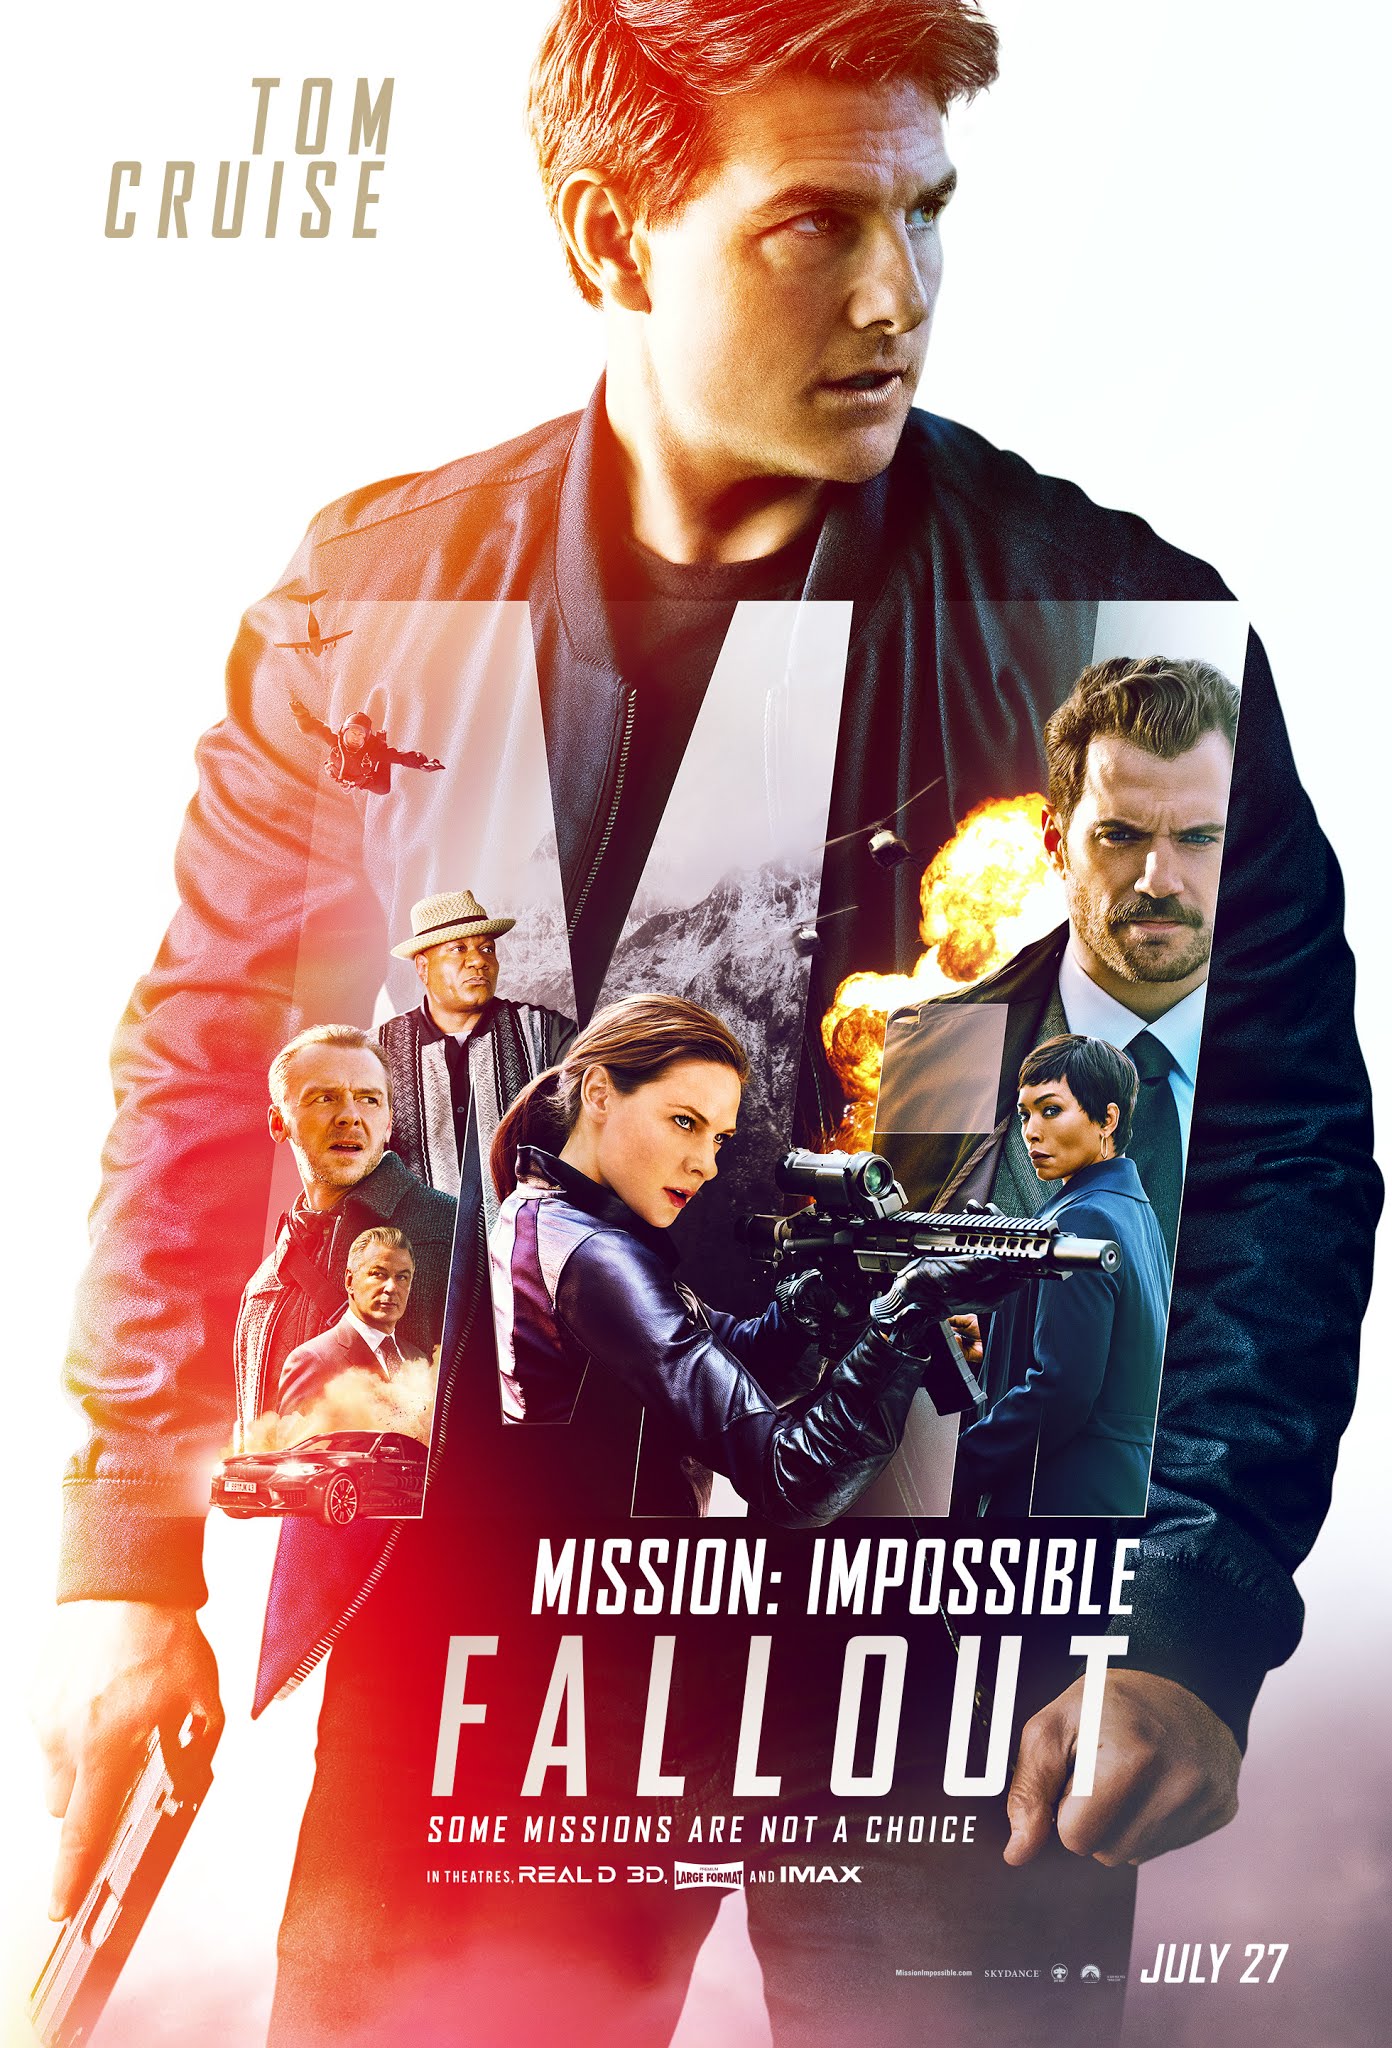 mission impossible 6 tom cruise henry cavill simon pegg